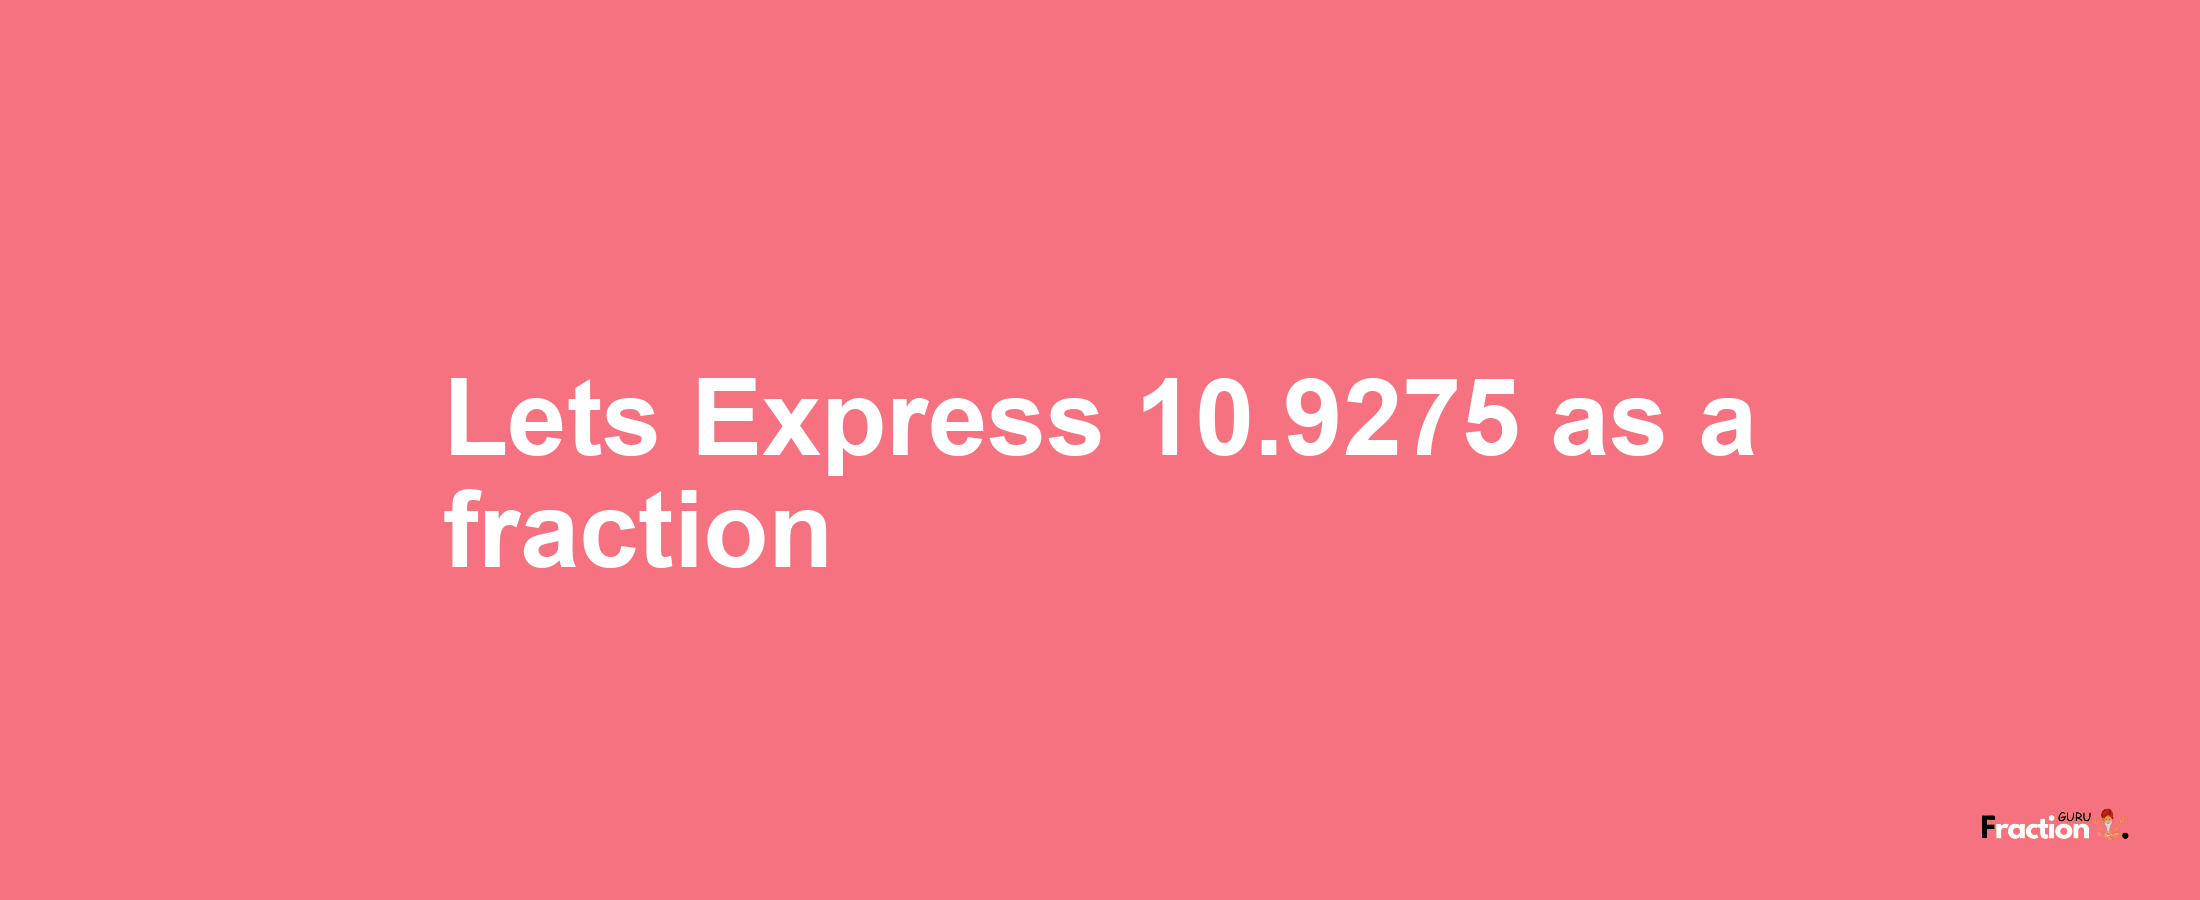 Lets Express 10.9275 as afraction